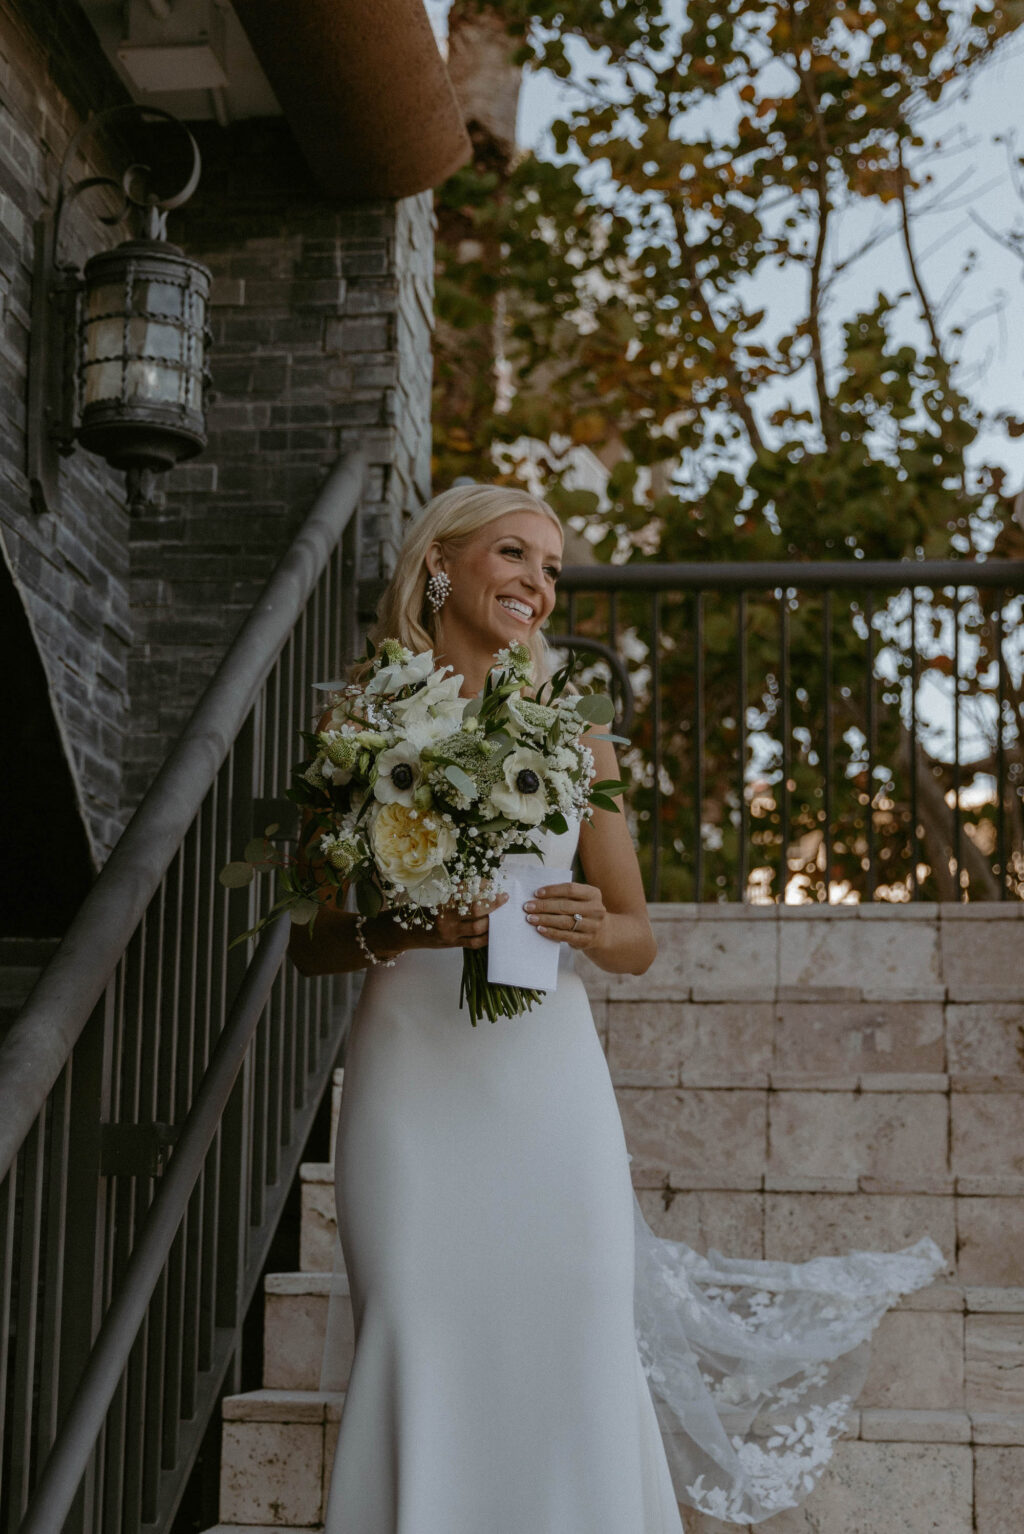 Bridal Bouquet with White Poppies and Greenery Bridal Portrait | St. Petersburg Florida Florist Lemon Drops Weddings and Events Florals Inspiration